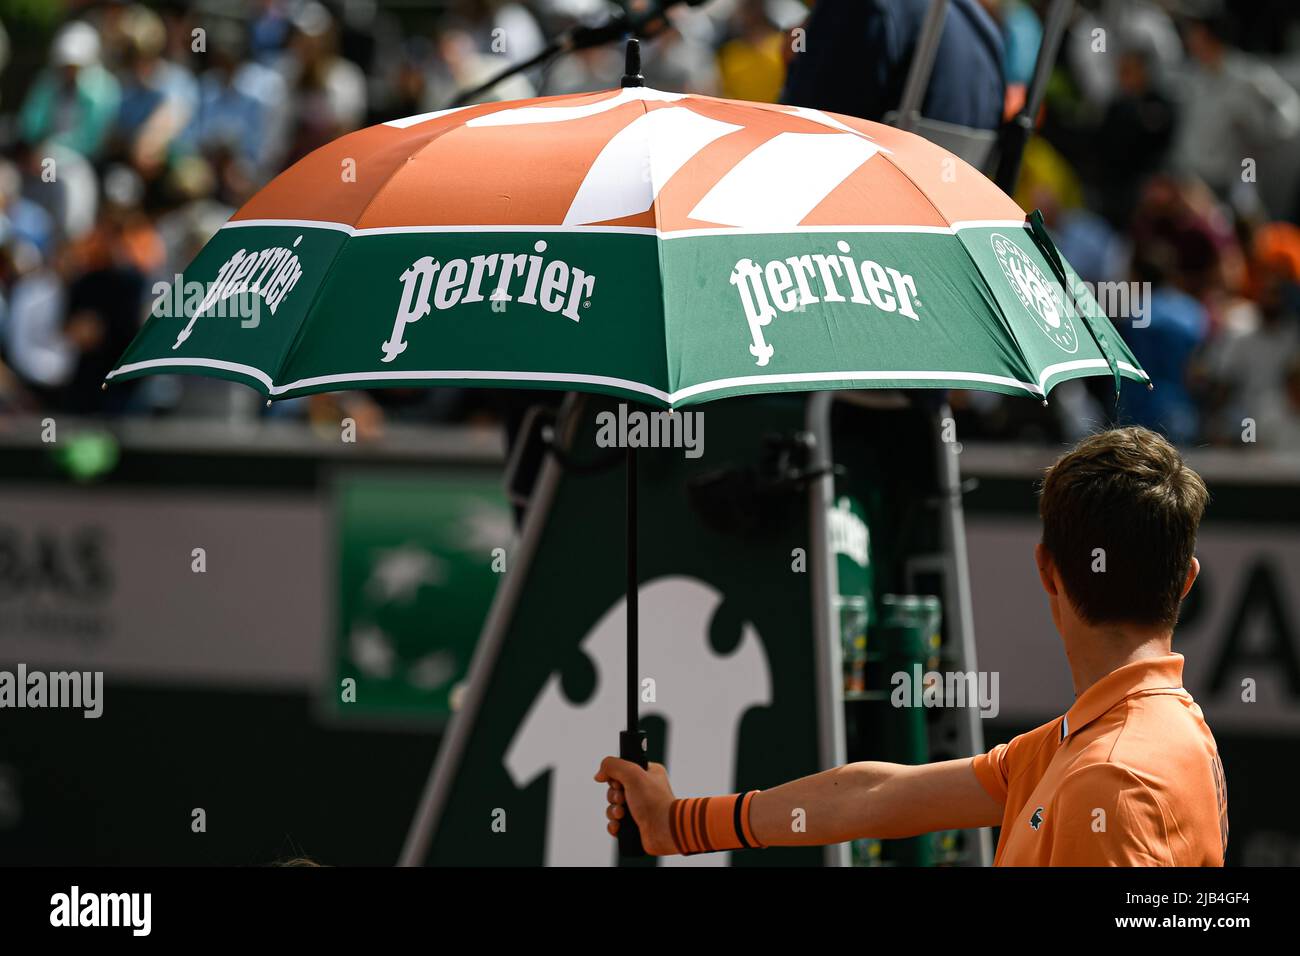 Illustration picture shows the umbrella or parasol held by a ball kid over  a player because of the heat during the French Open, Grand Slam tennis  tournament on May 24, 2022 at